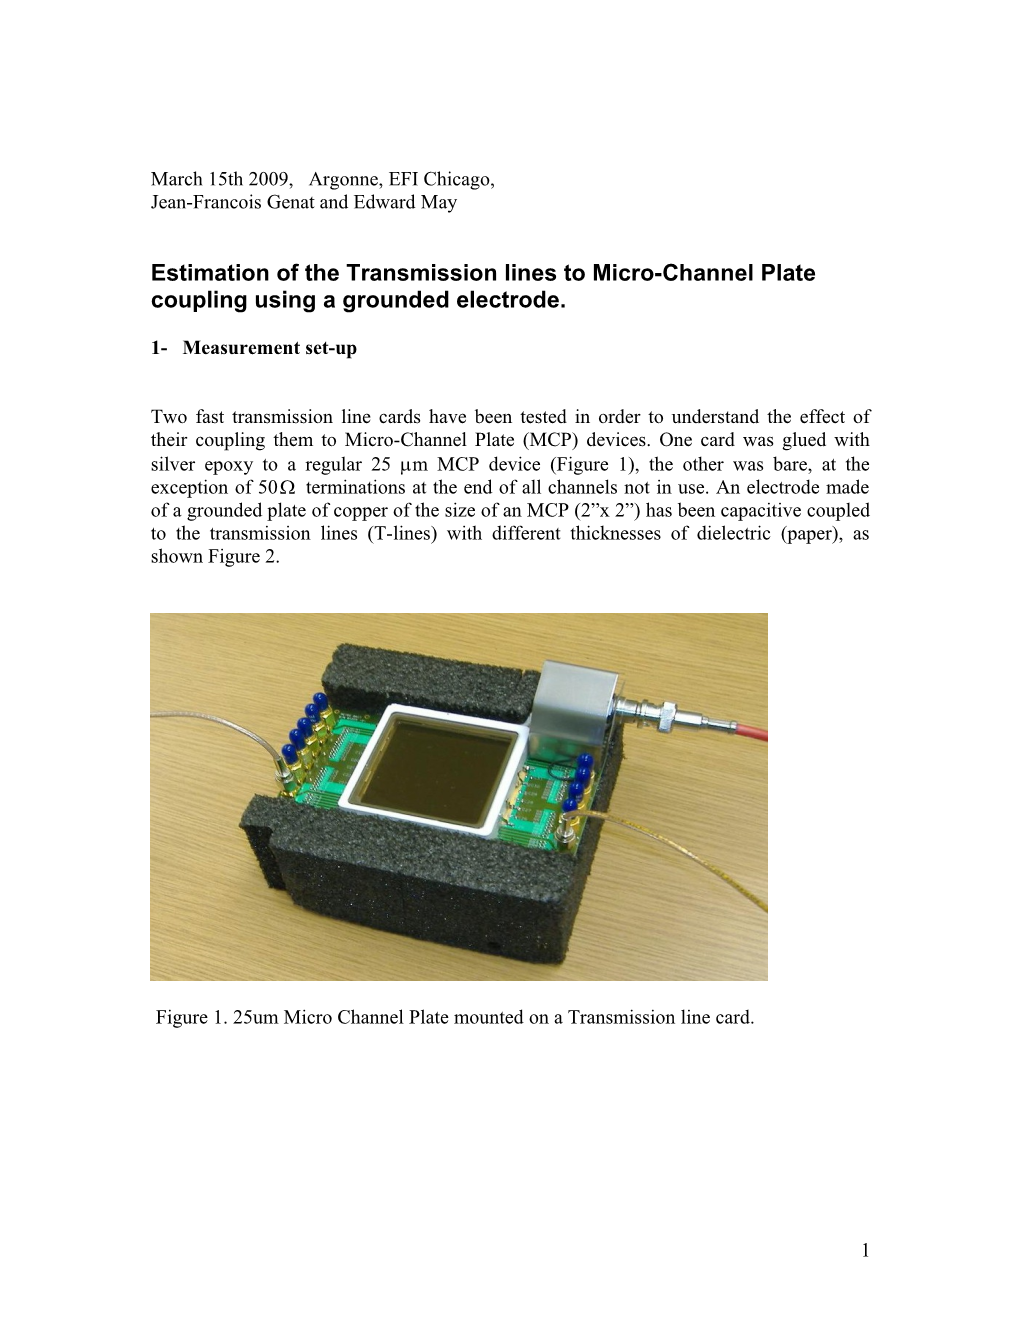 Estimation of the Transmission Linestomicro-Channel Plate Coupling Using a Grounded Electrode